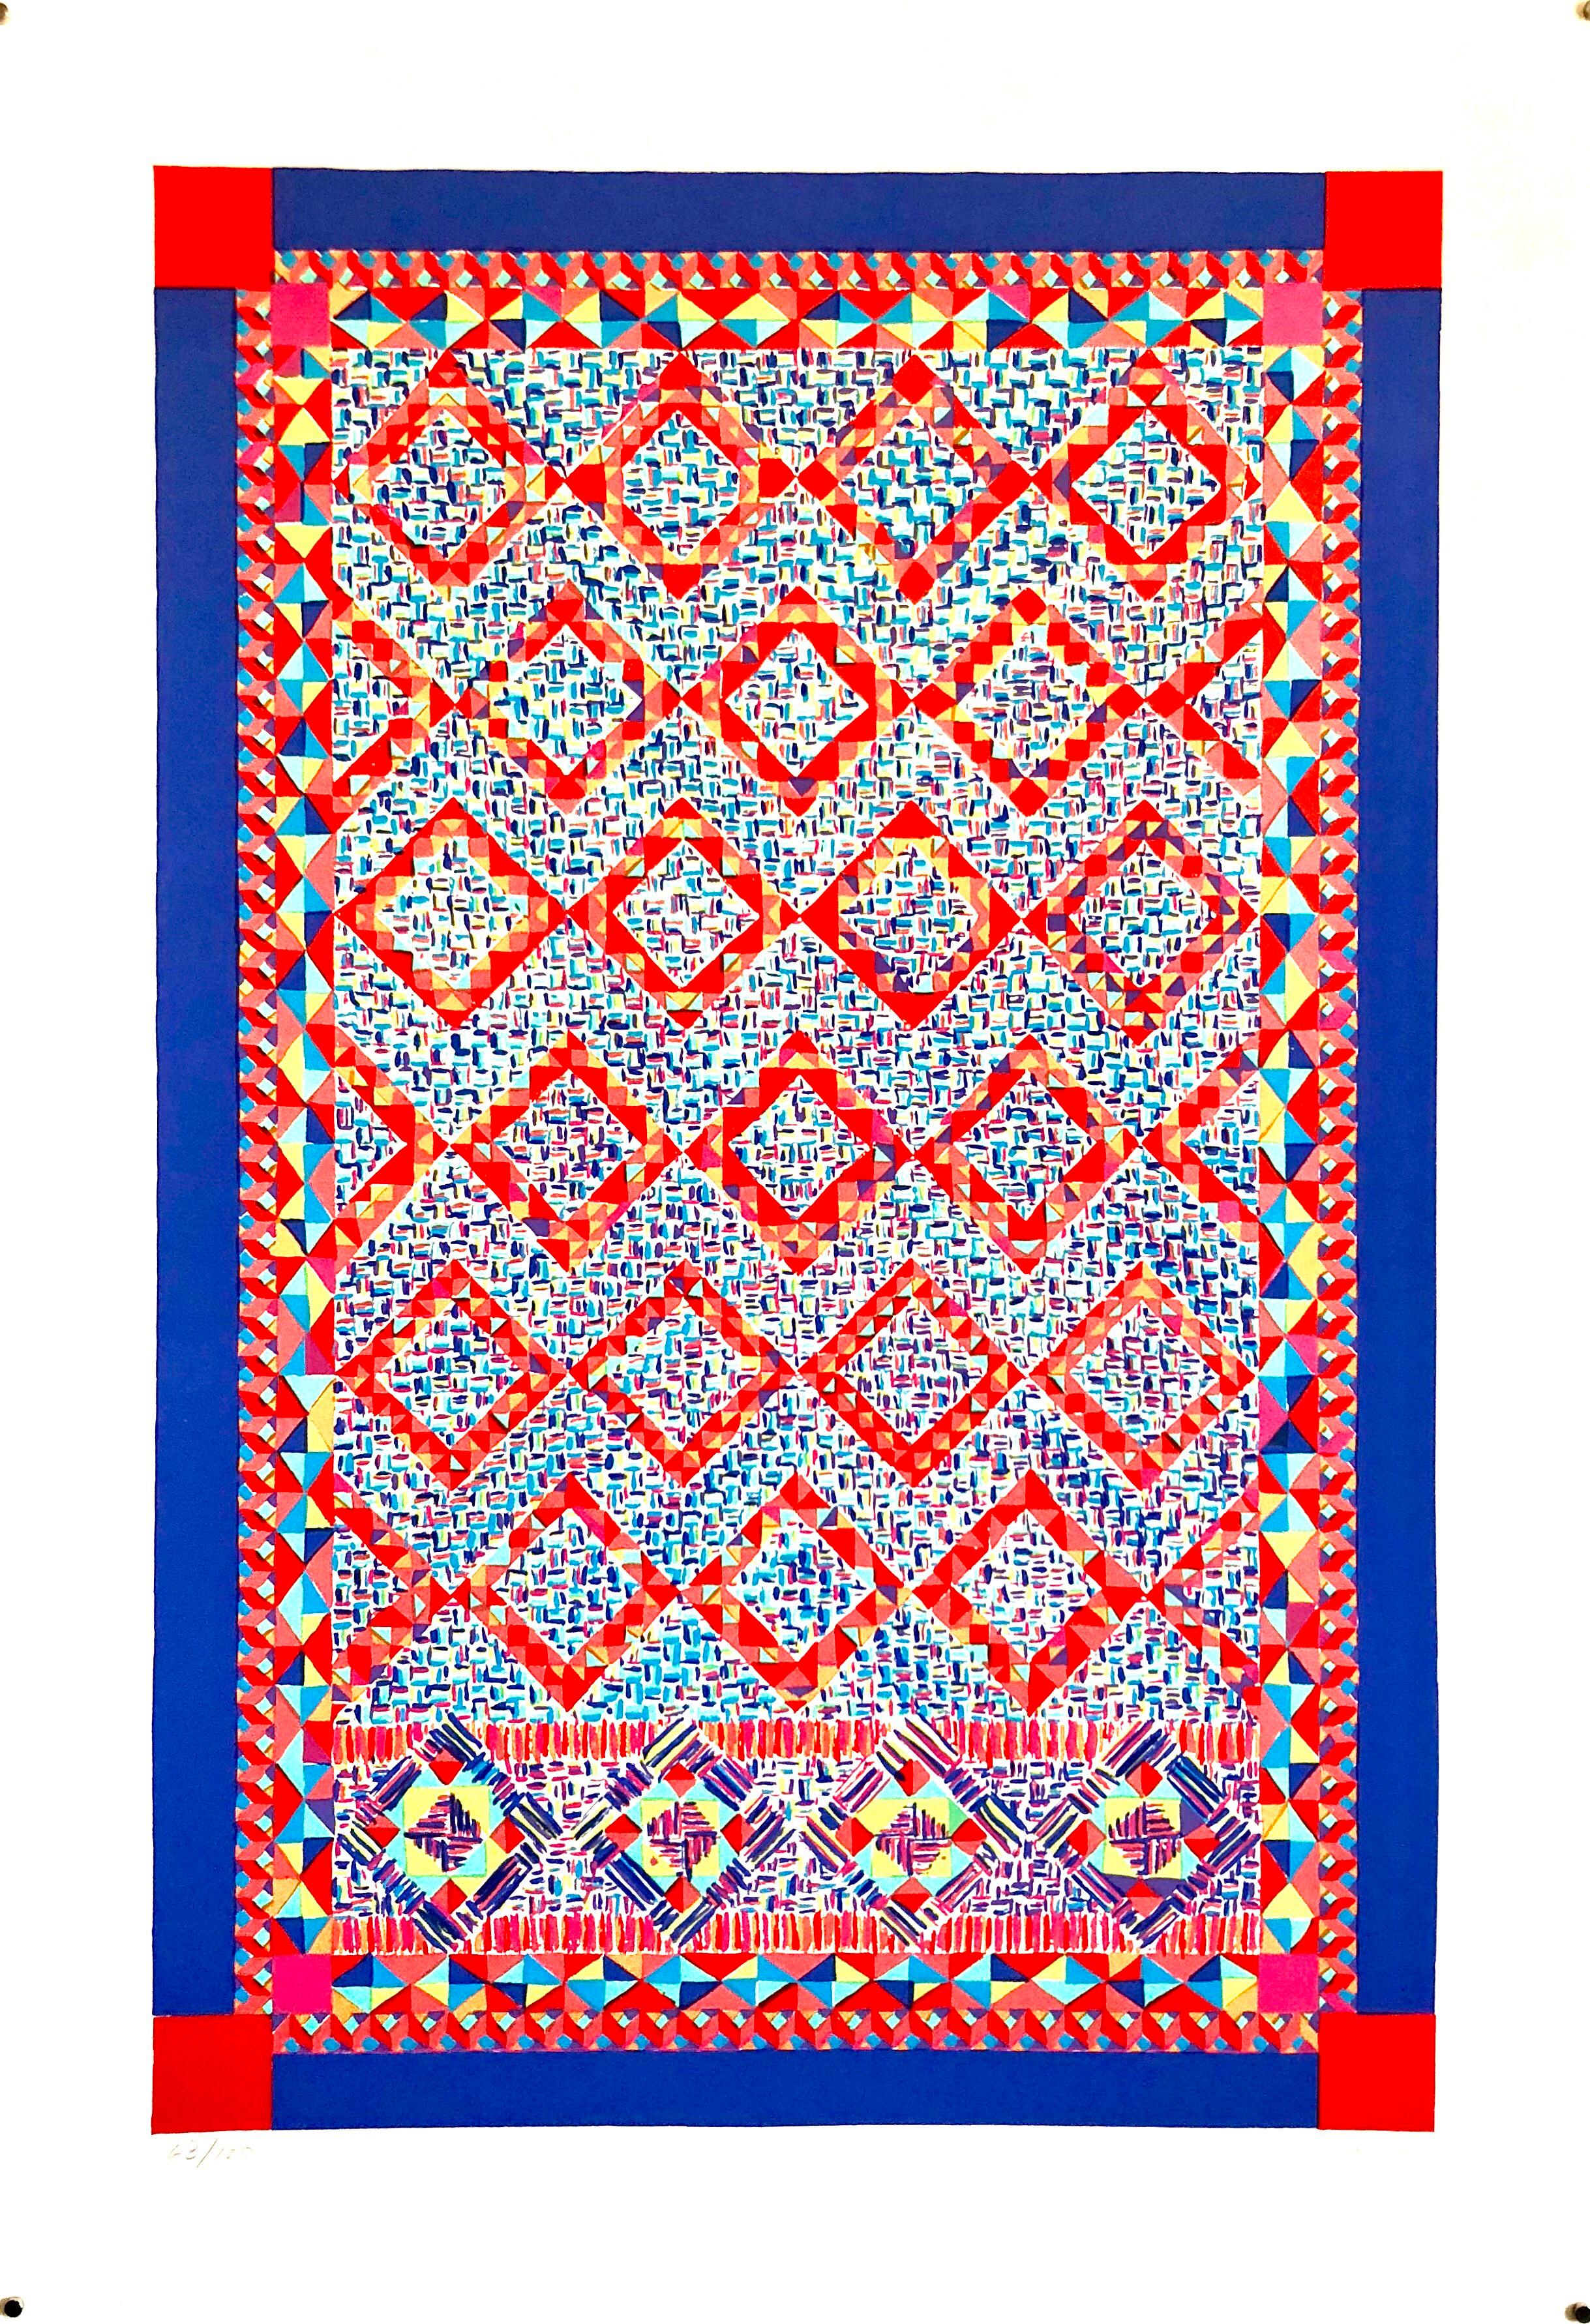 Quilt or Persian Rug Serigraph Pattern and Decoration Feminist Lithograph Print